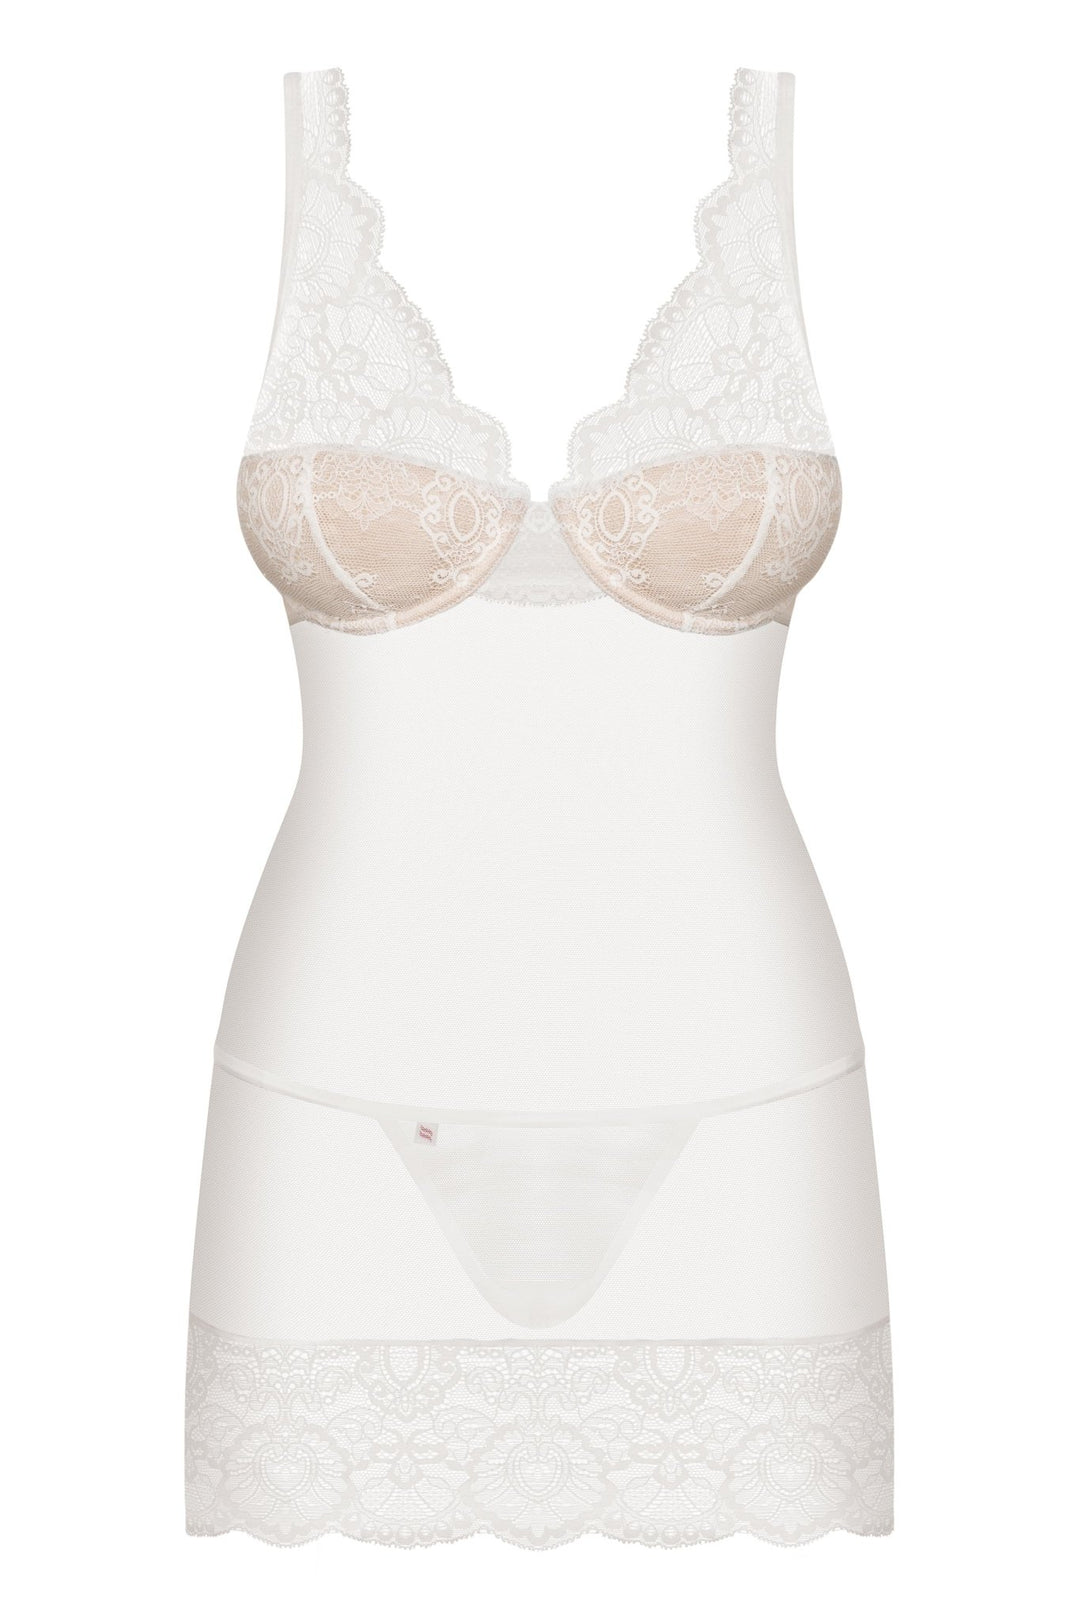 ivory lace lingerie